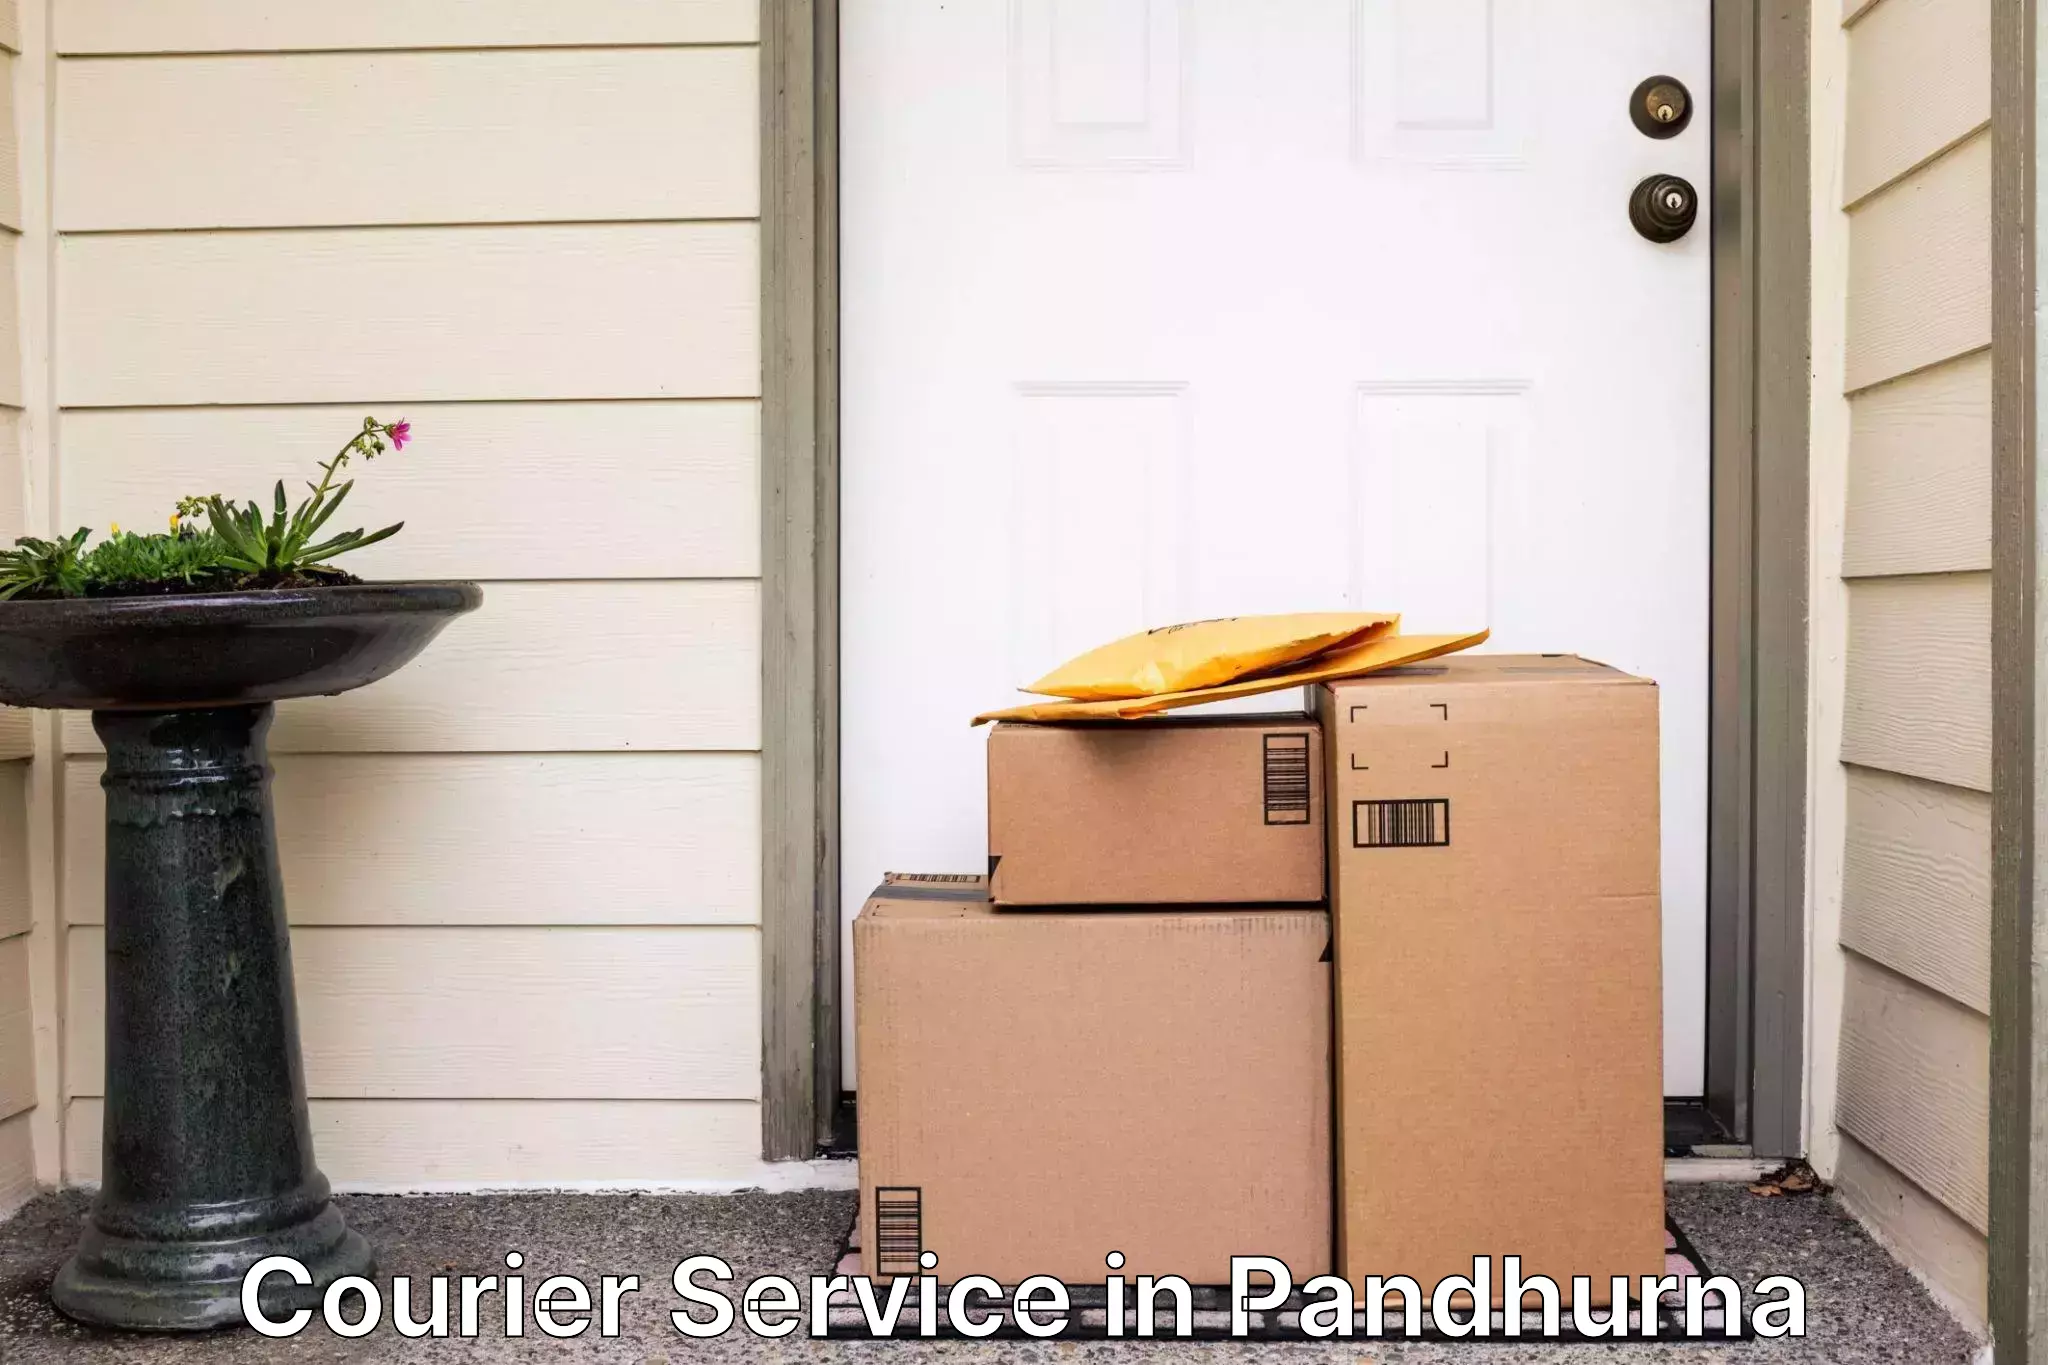 Fast shipping solutions in Pandhurna